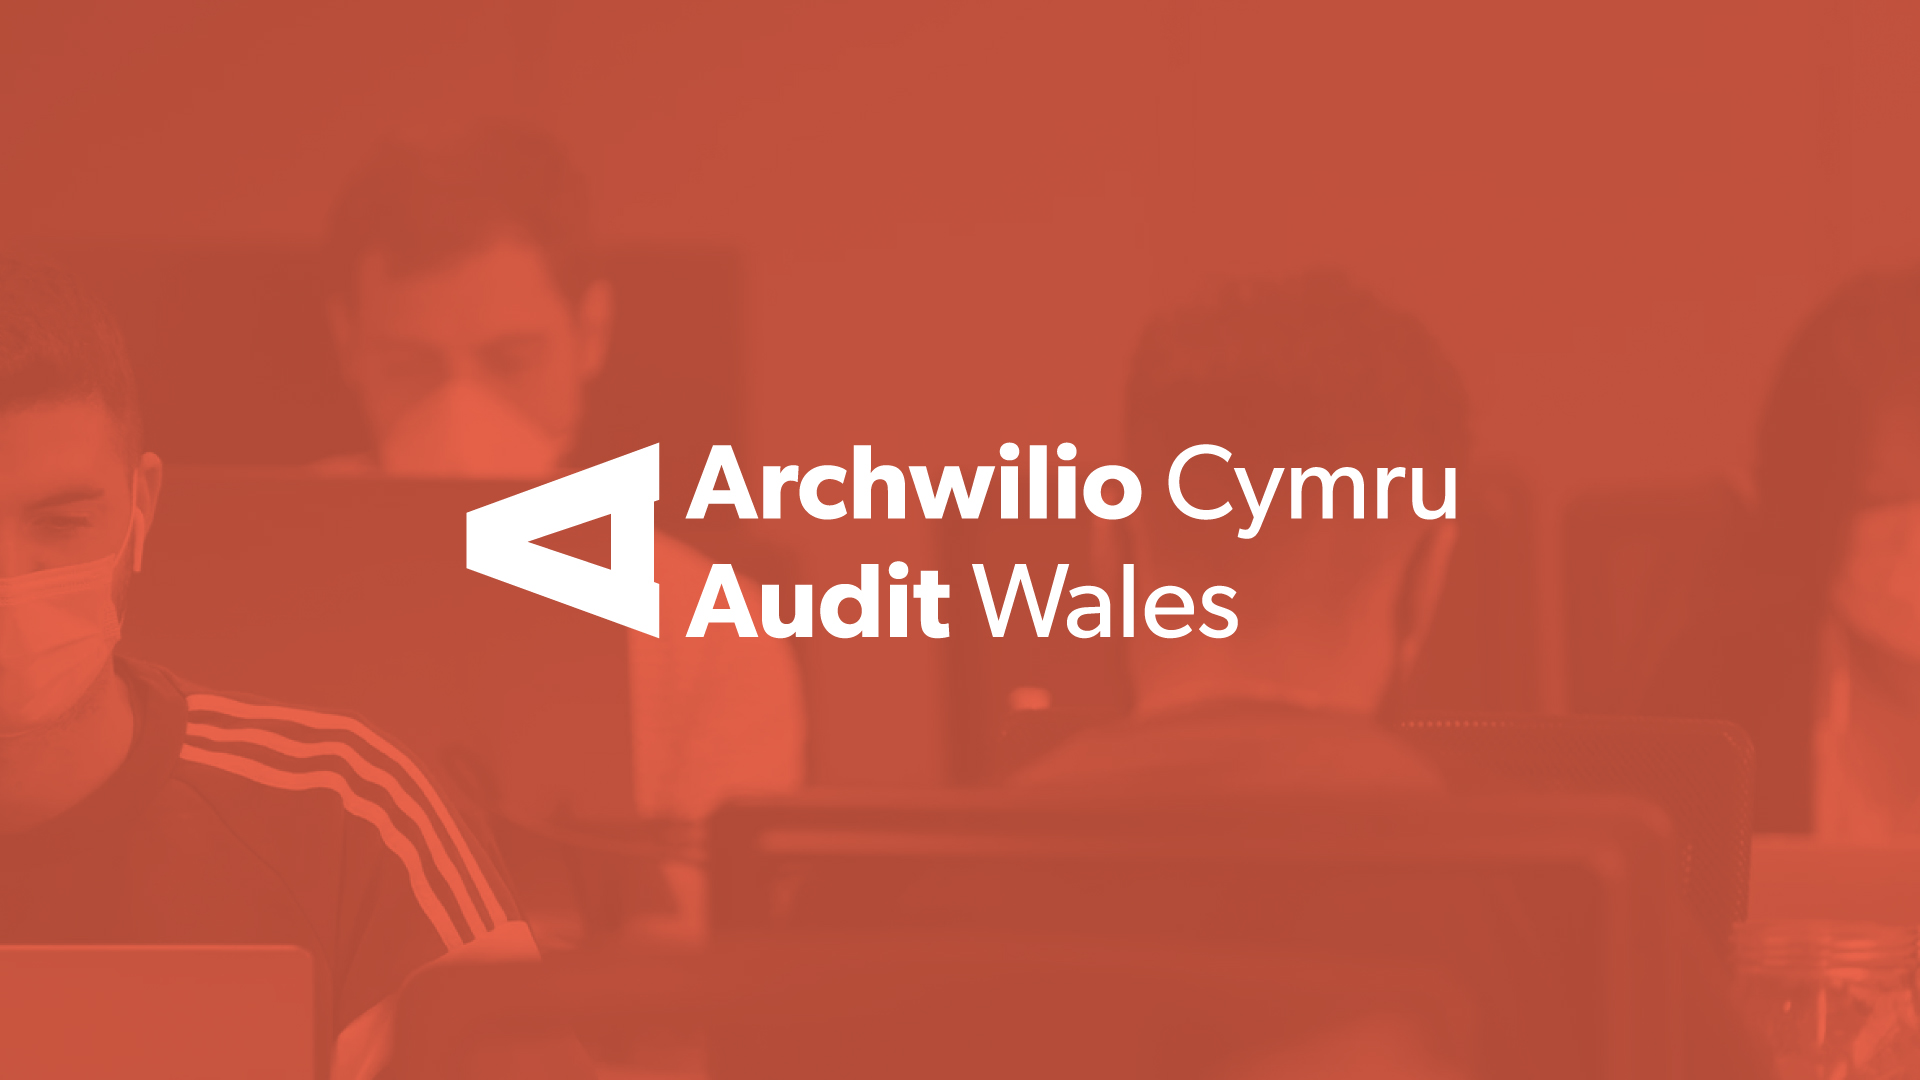 Audit Wales logo with image of people using computers in the background